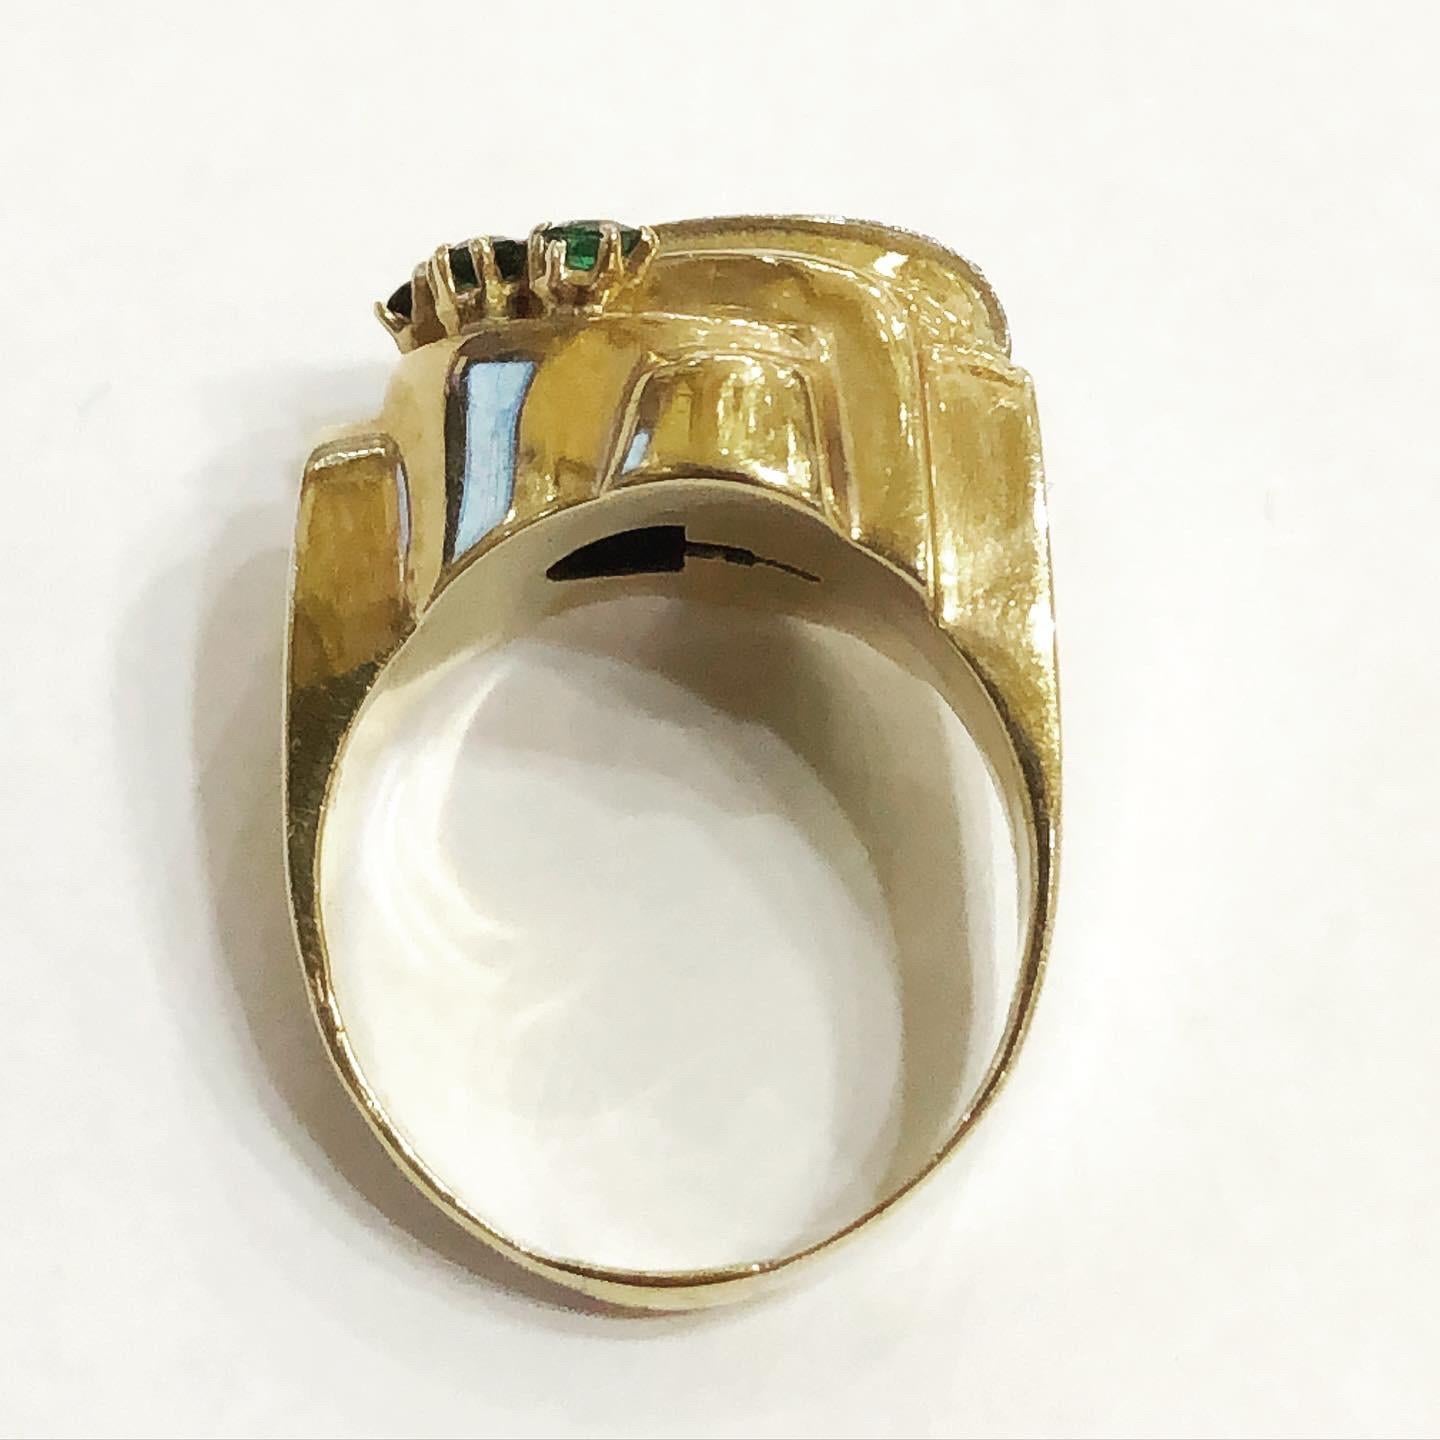 1940s Retro Diamond green Tourmaline Gold Tank Cocktail Ring.
Ring in 18 karat yellow gold. Superb tank ring, linear and geometrical design typical for this period.
Circa 1935-1940
Old European diamond cut.
Round tourmaline cut.
Total approximate